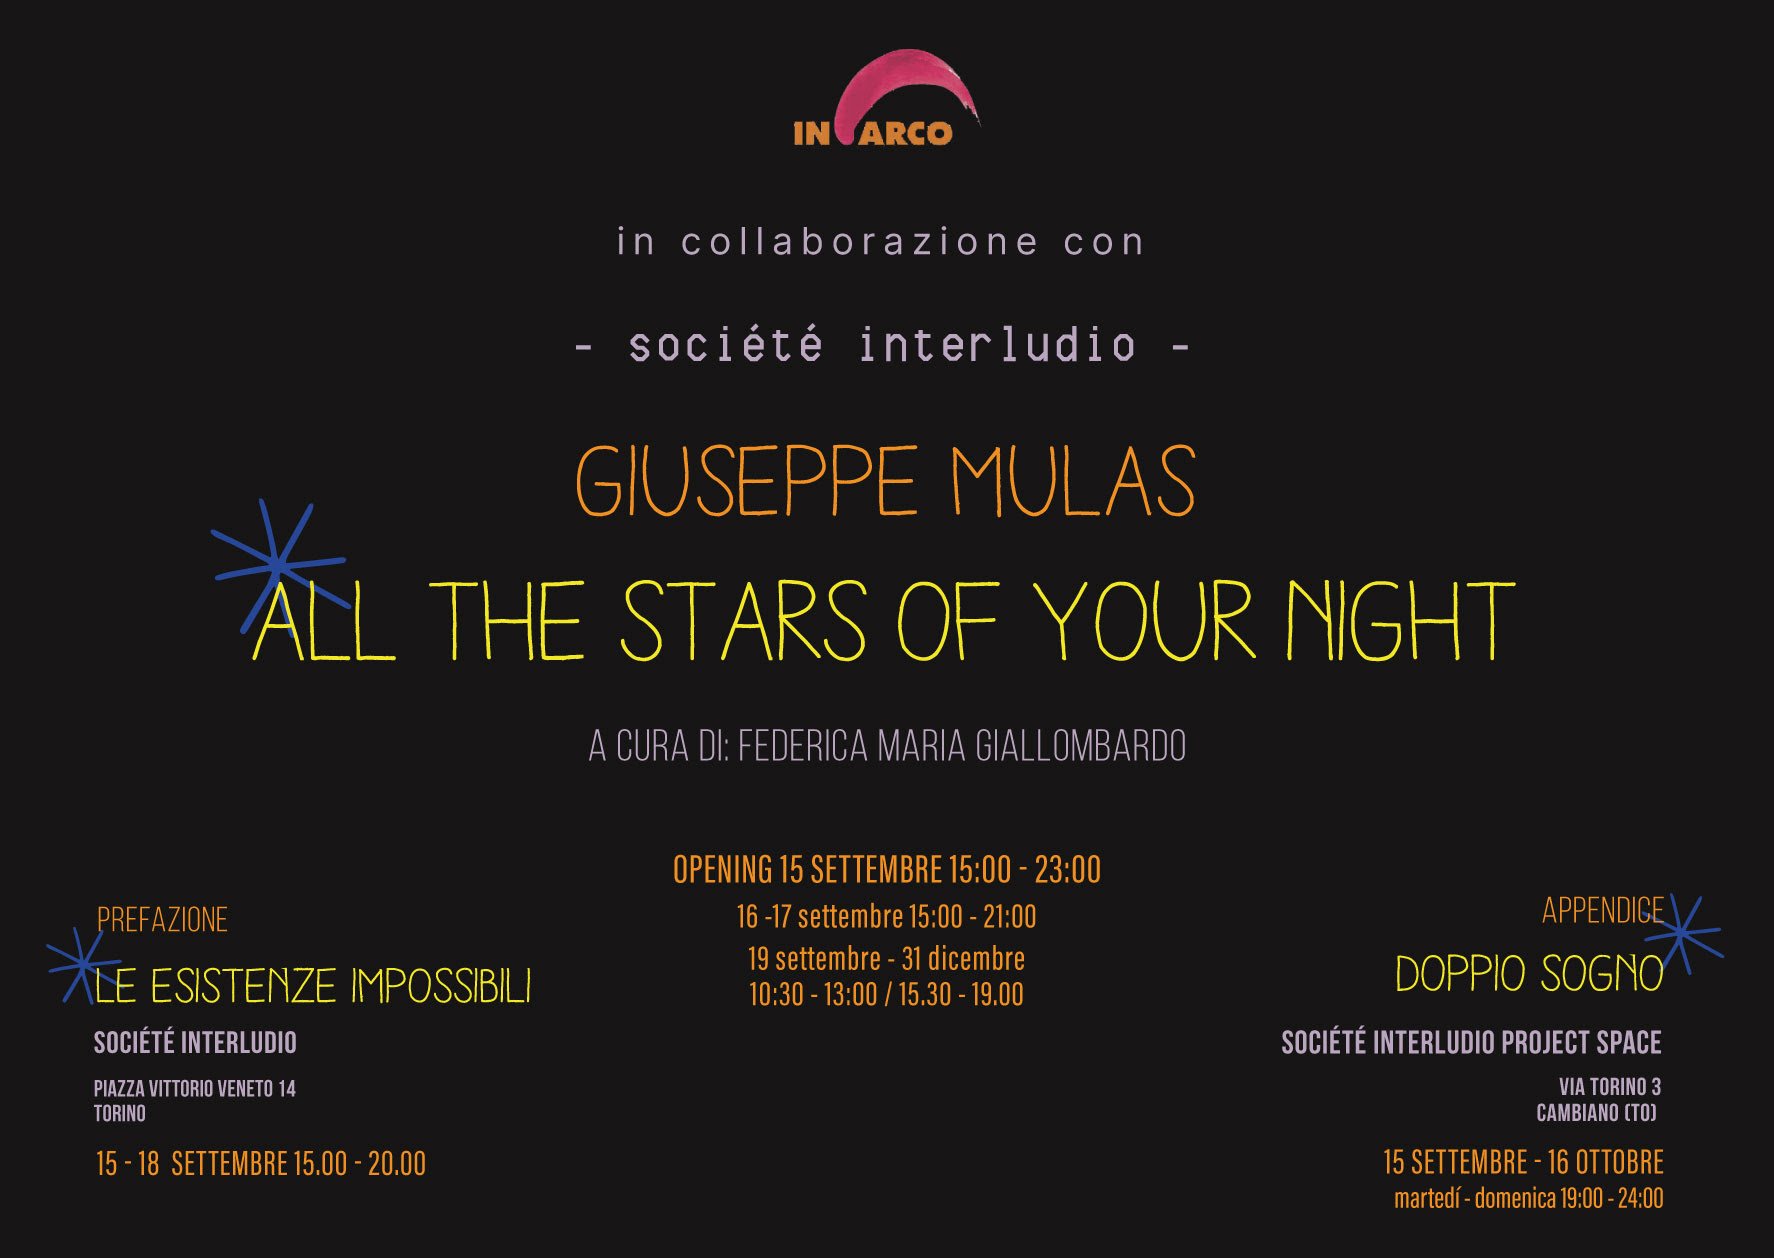 Giuseppe Mulas - All the stars of your night